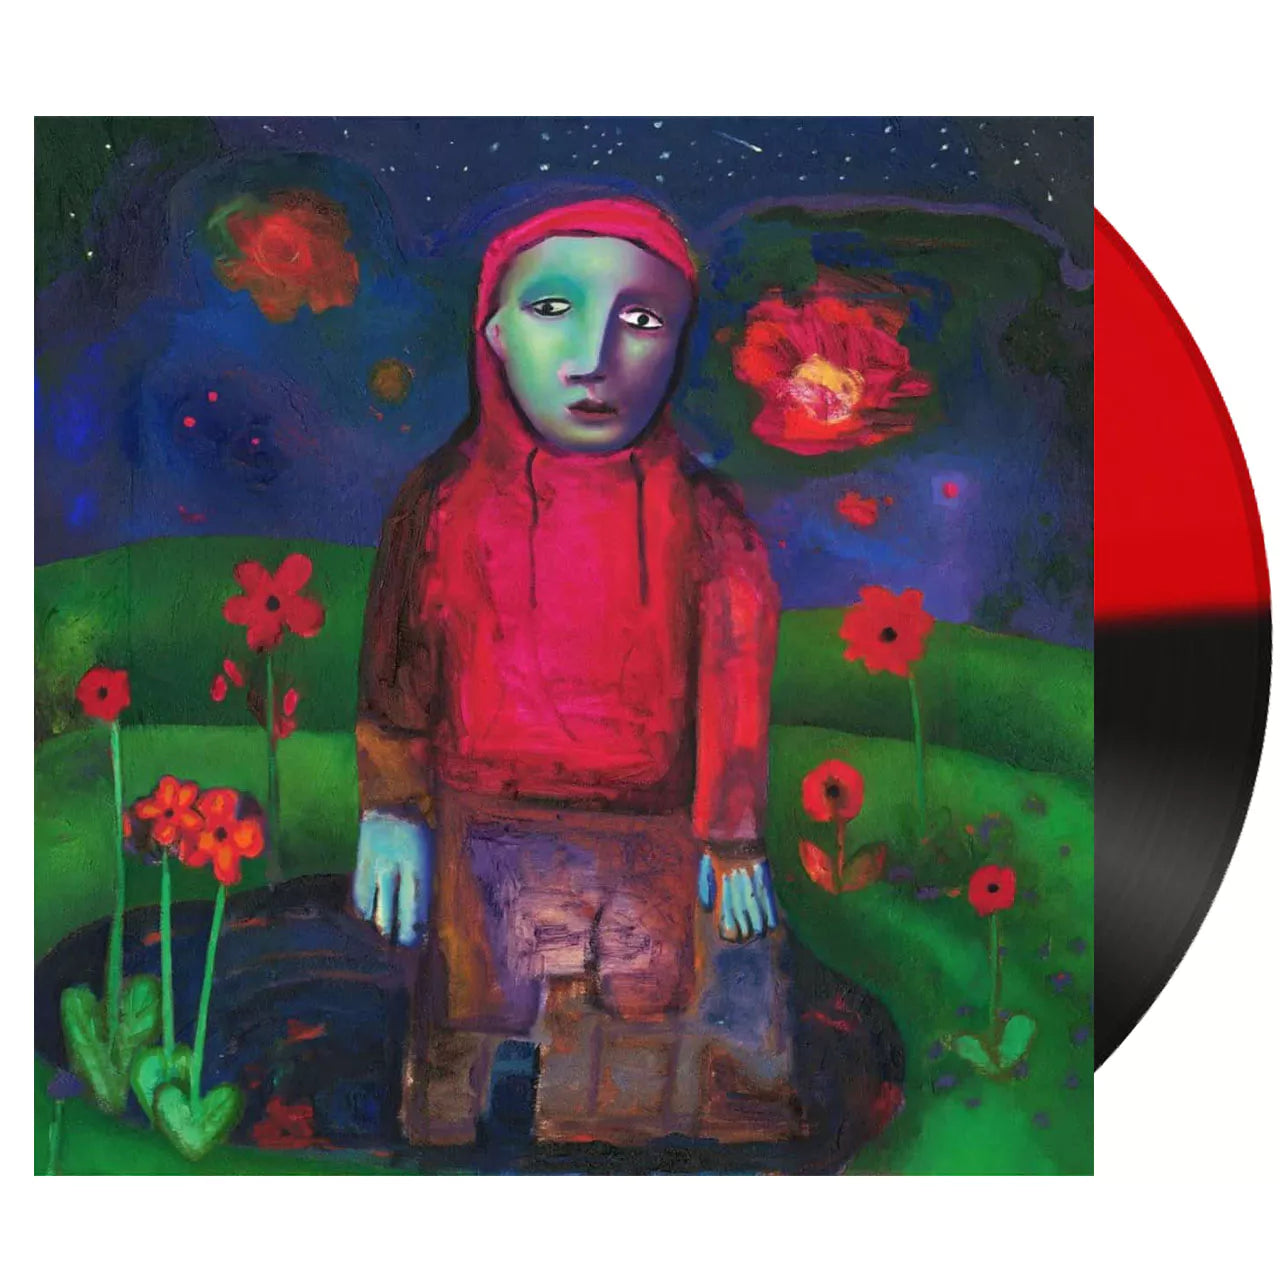 Girl in Red - If I Could Make It Go Quiet (Limited Edition on Black & Red Vinyl)